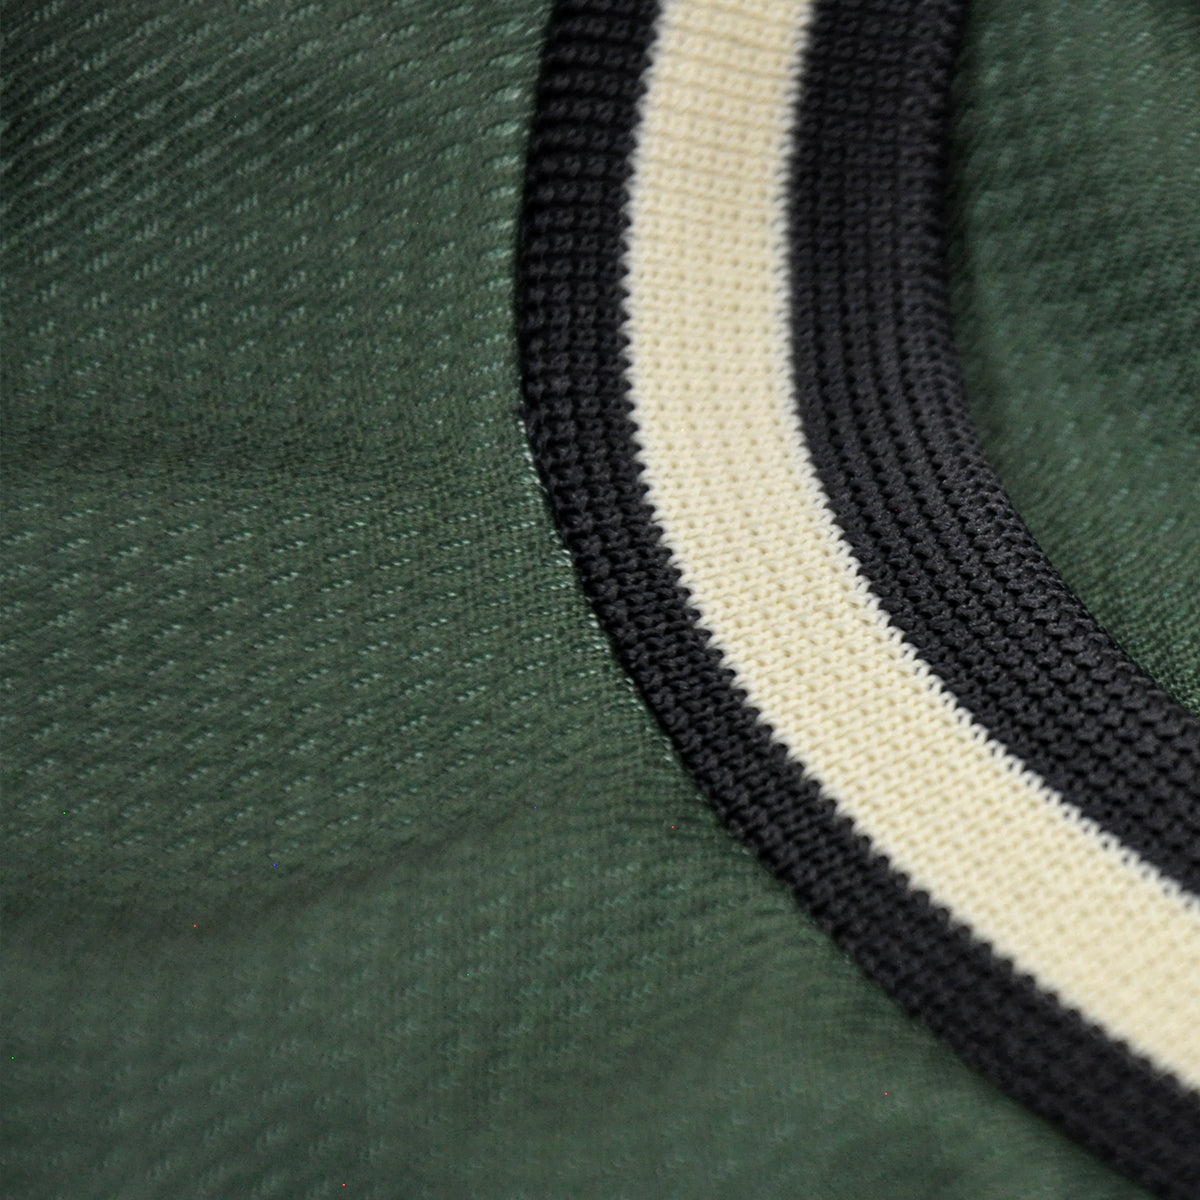 Olive Fade Mesh Jersey